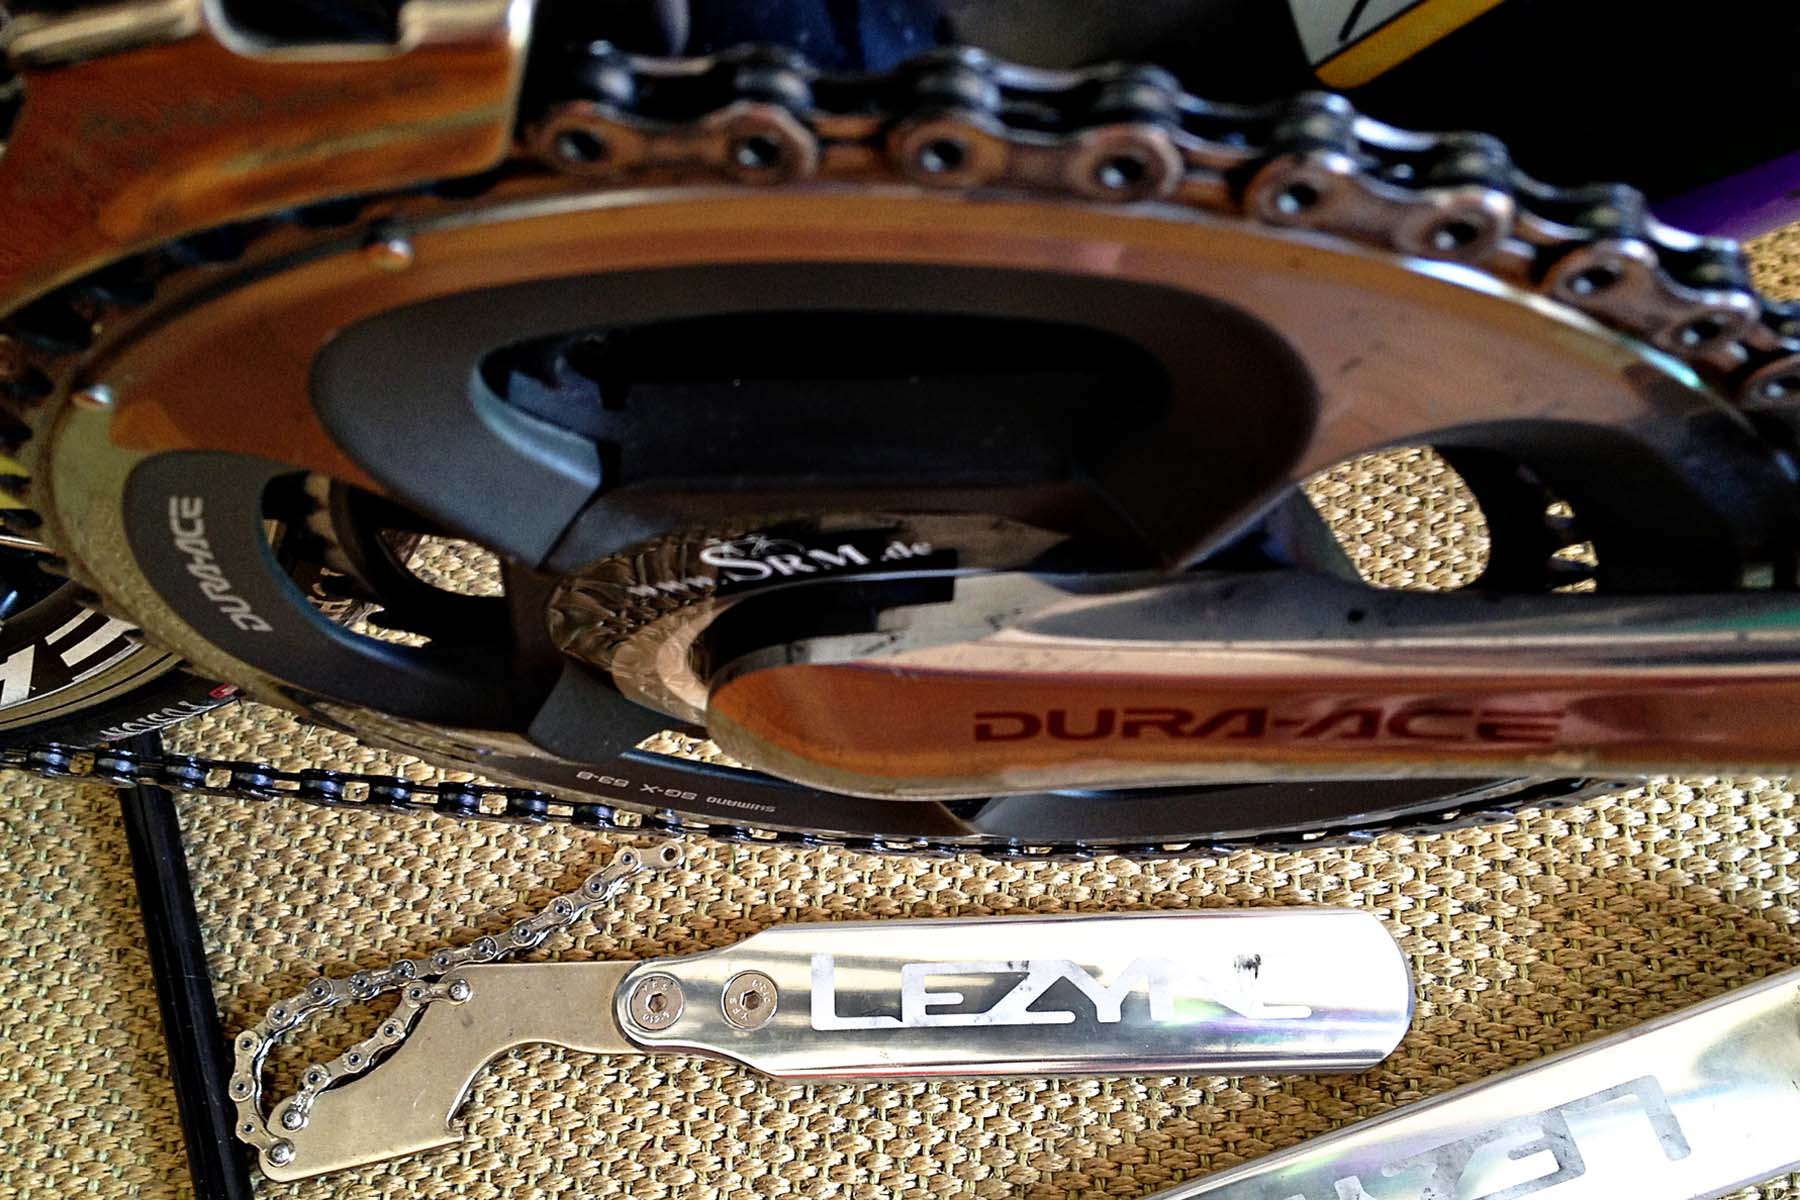 My chain might not always be squeaky clean for training, but you can bet it will be spotless for every race!